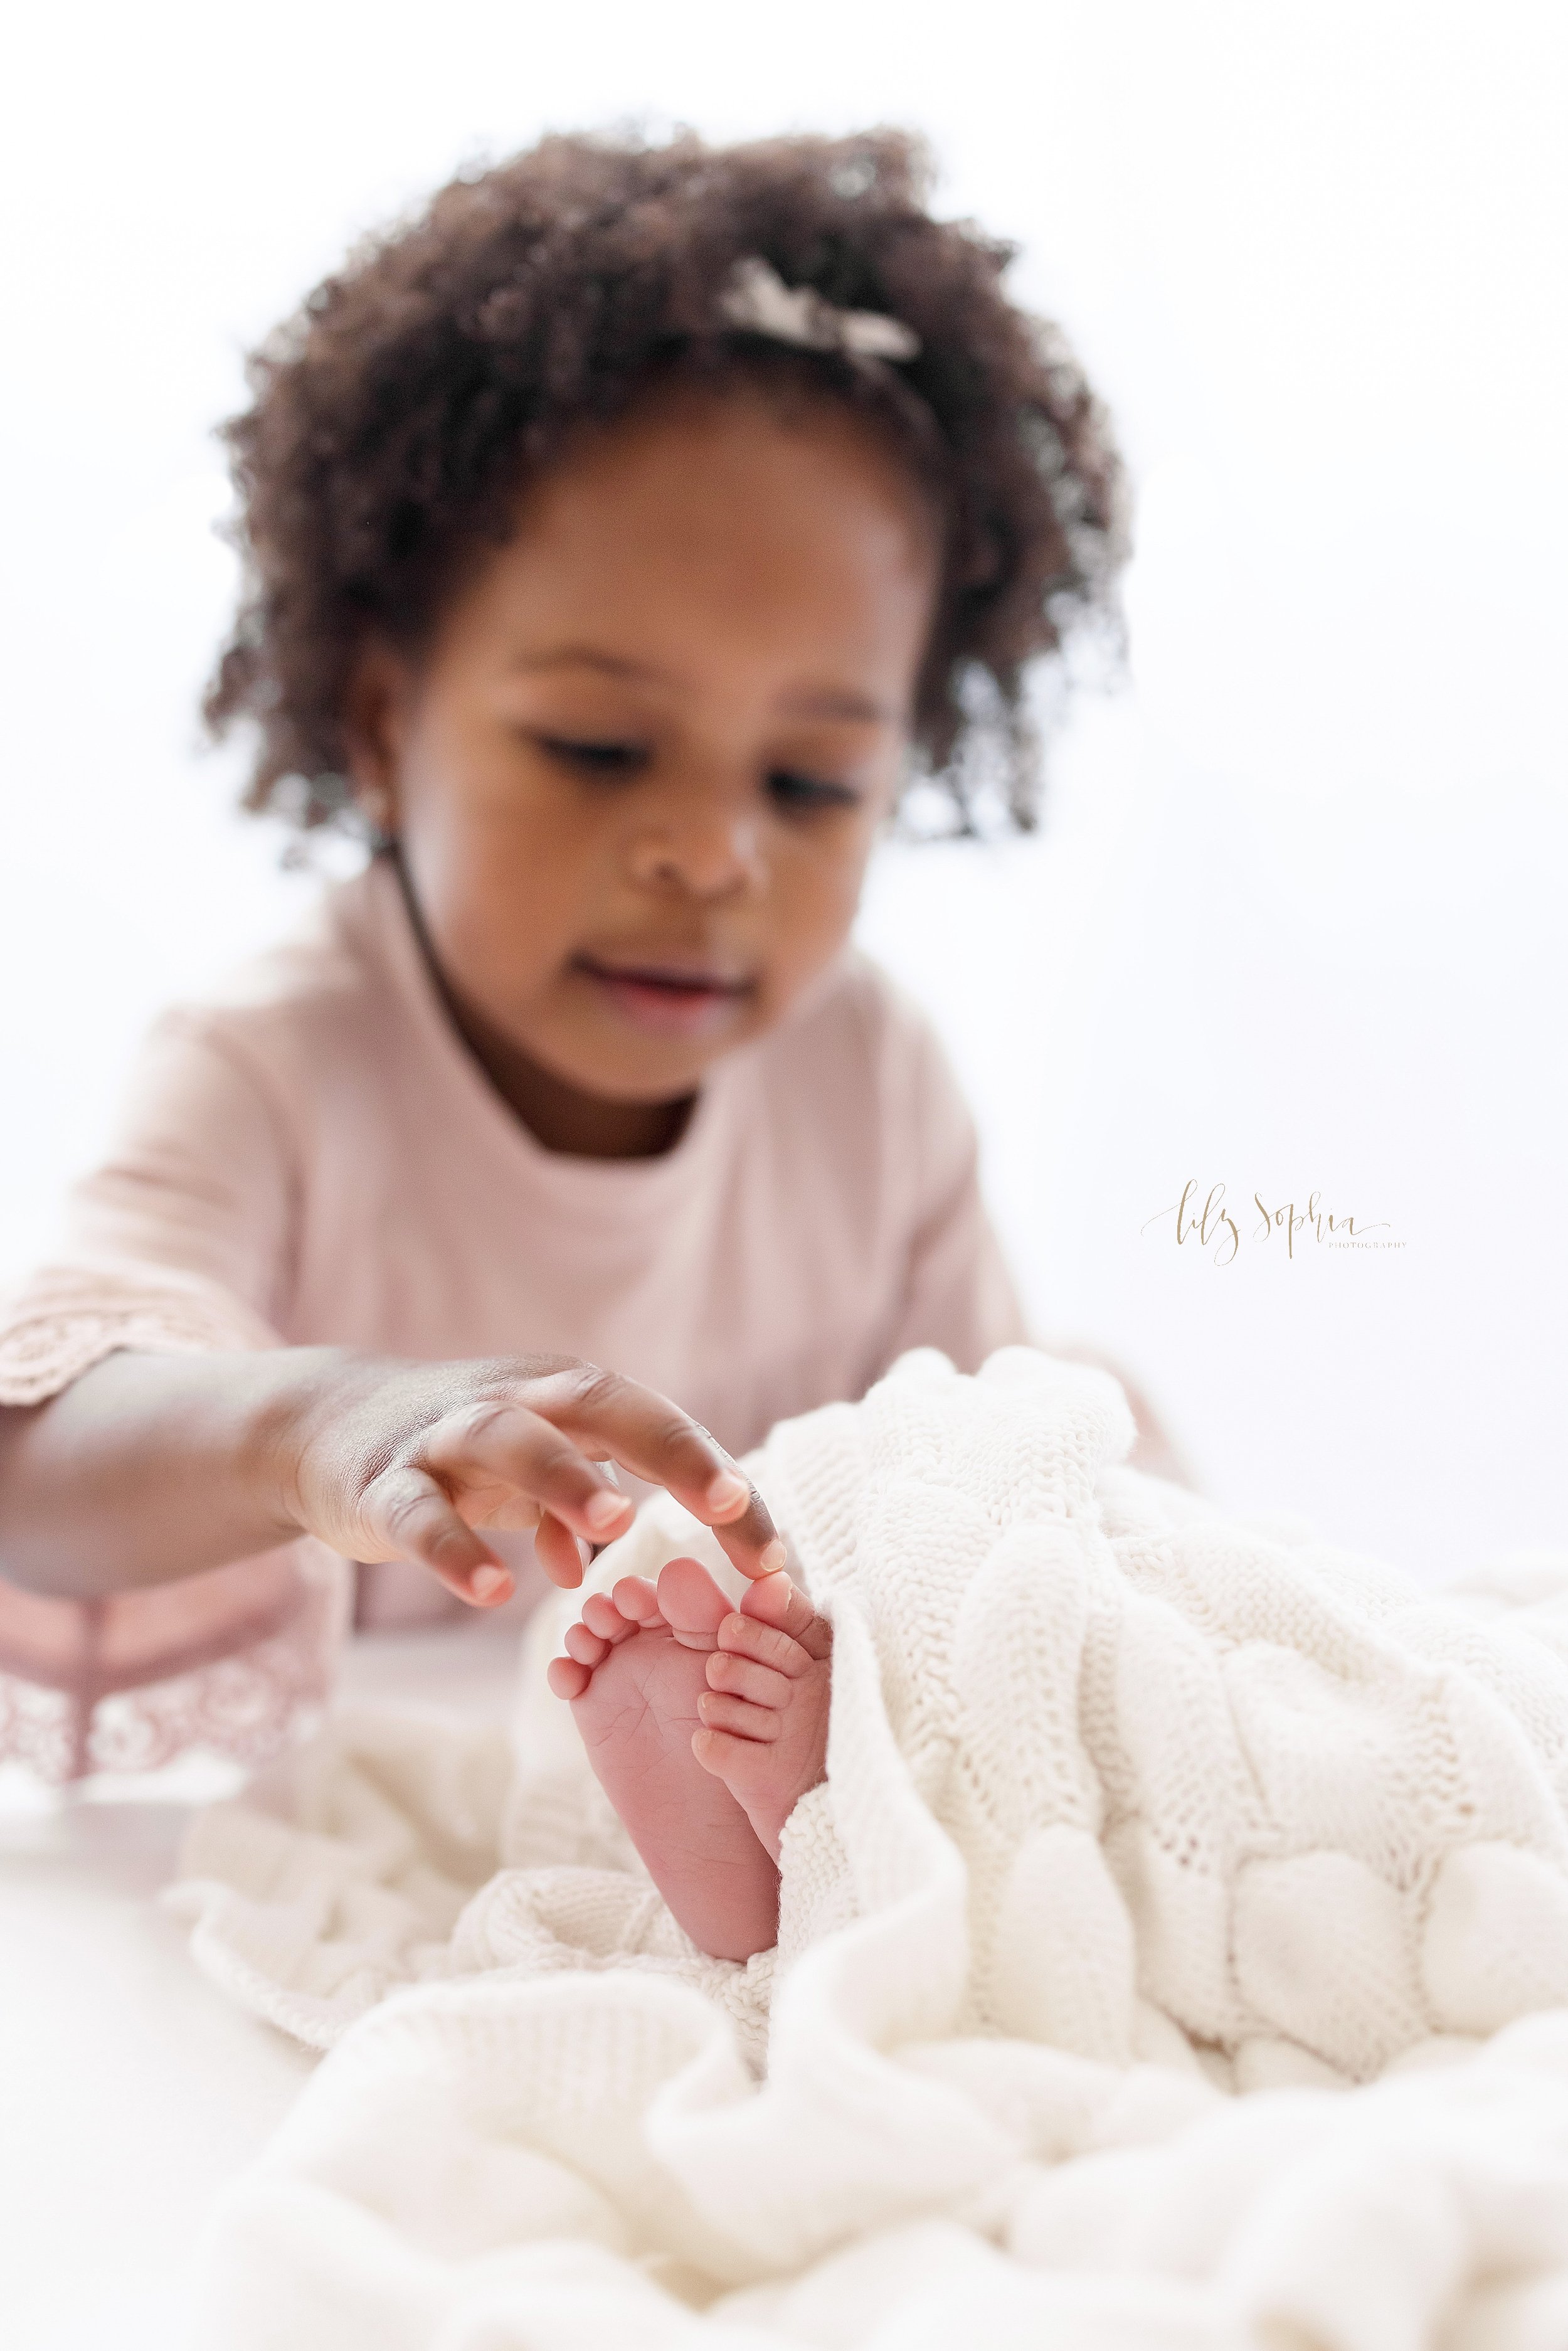  Newborn photo of a baby girl’s feet peeking out from a soft white knitted blanket as her toddler sister plays “This Little Piggy Goes to Market” on them taken in front of a window streaming natural light in a studio near Buckhead in Atlanta, Georgia